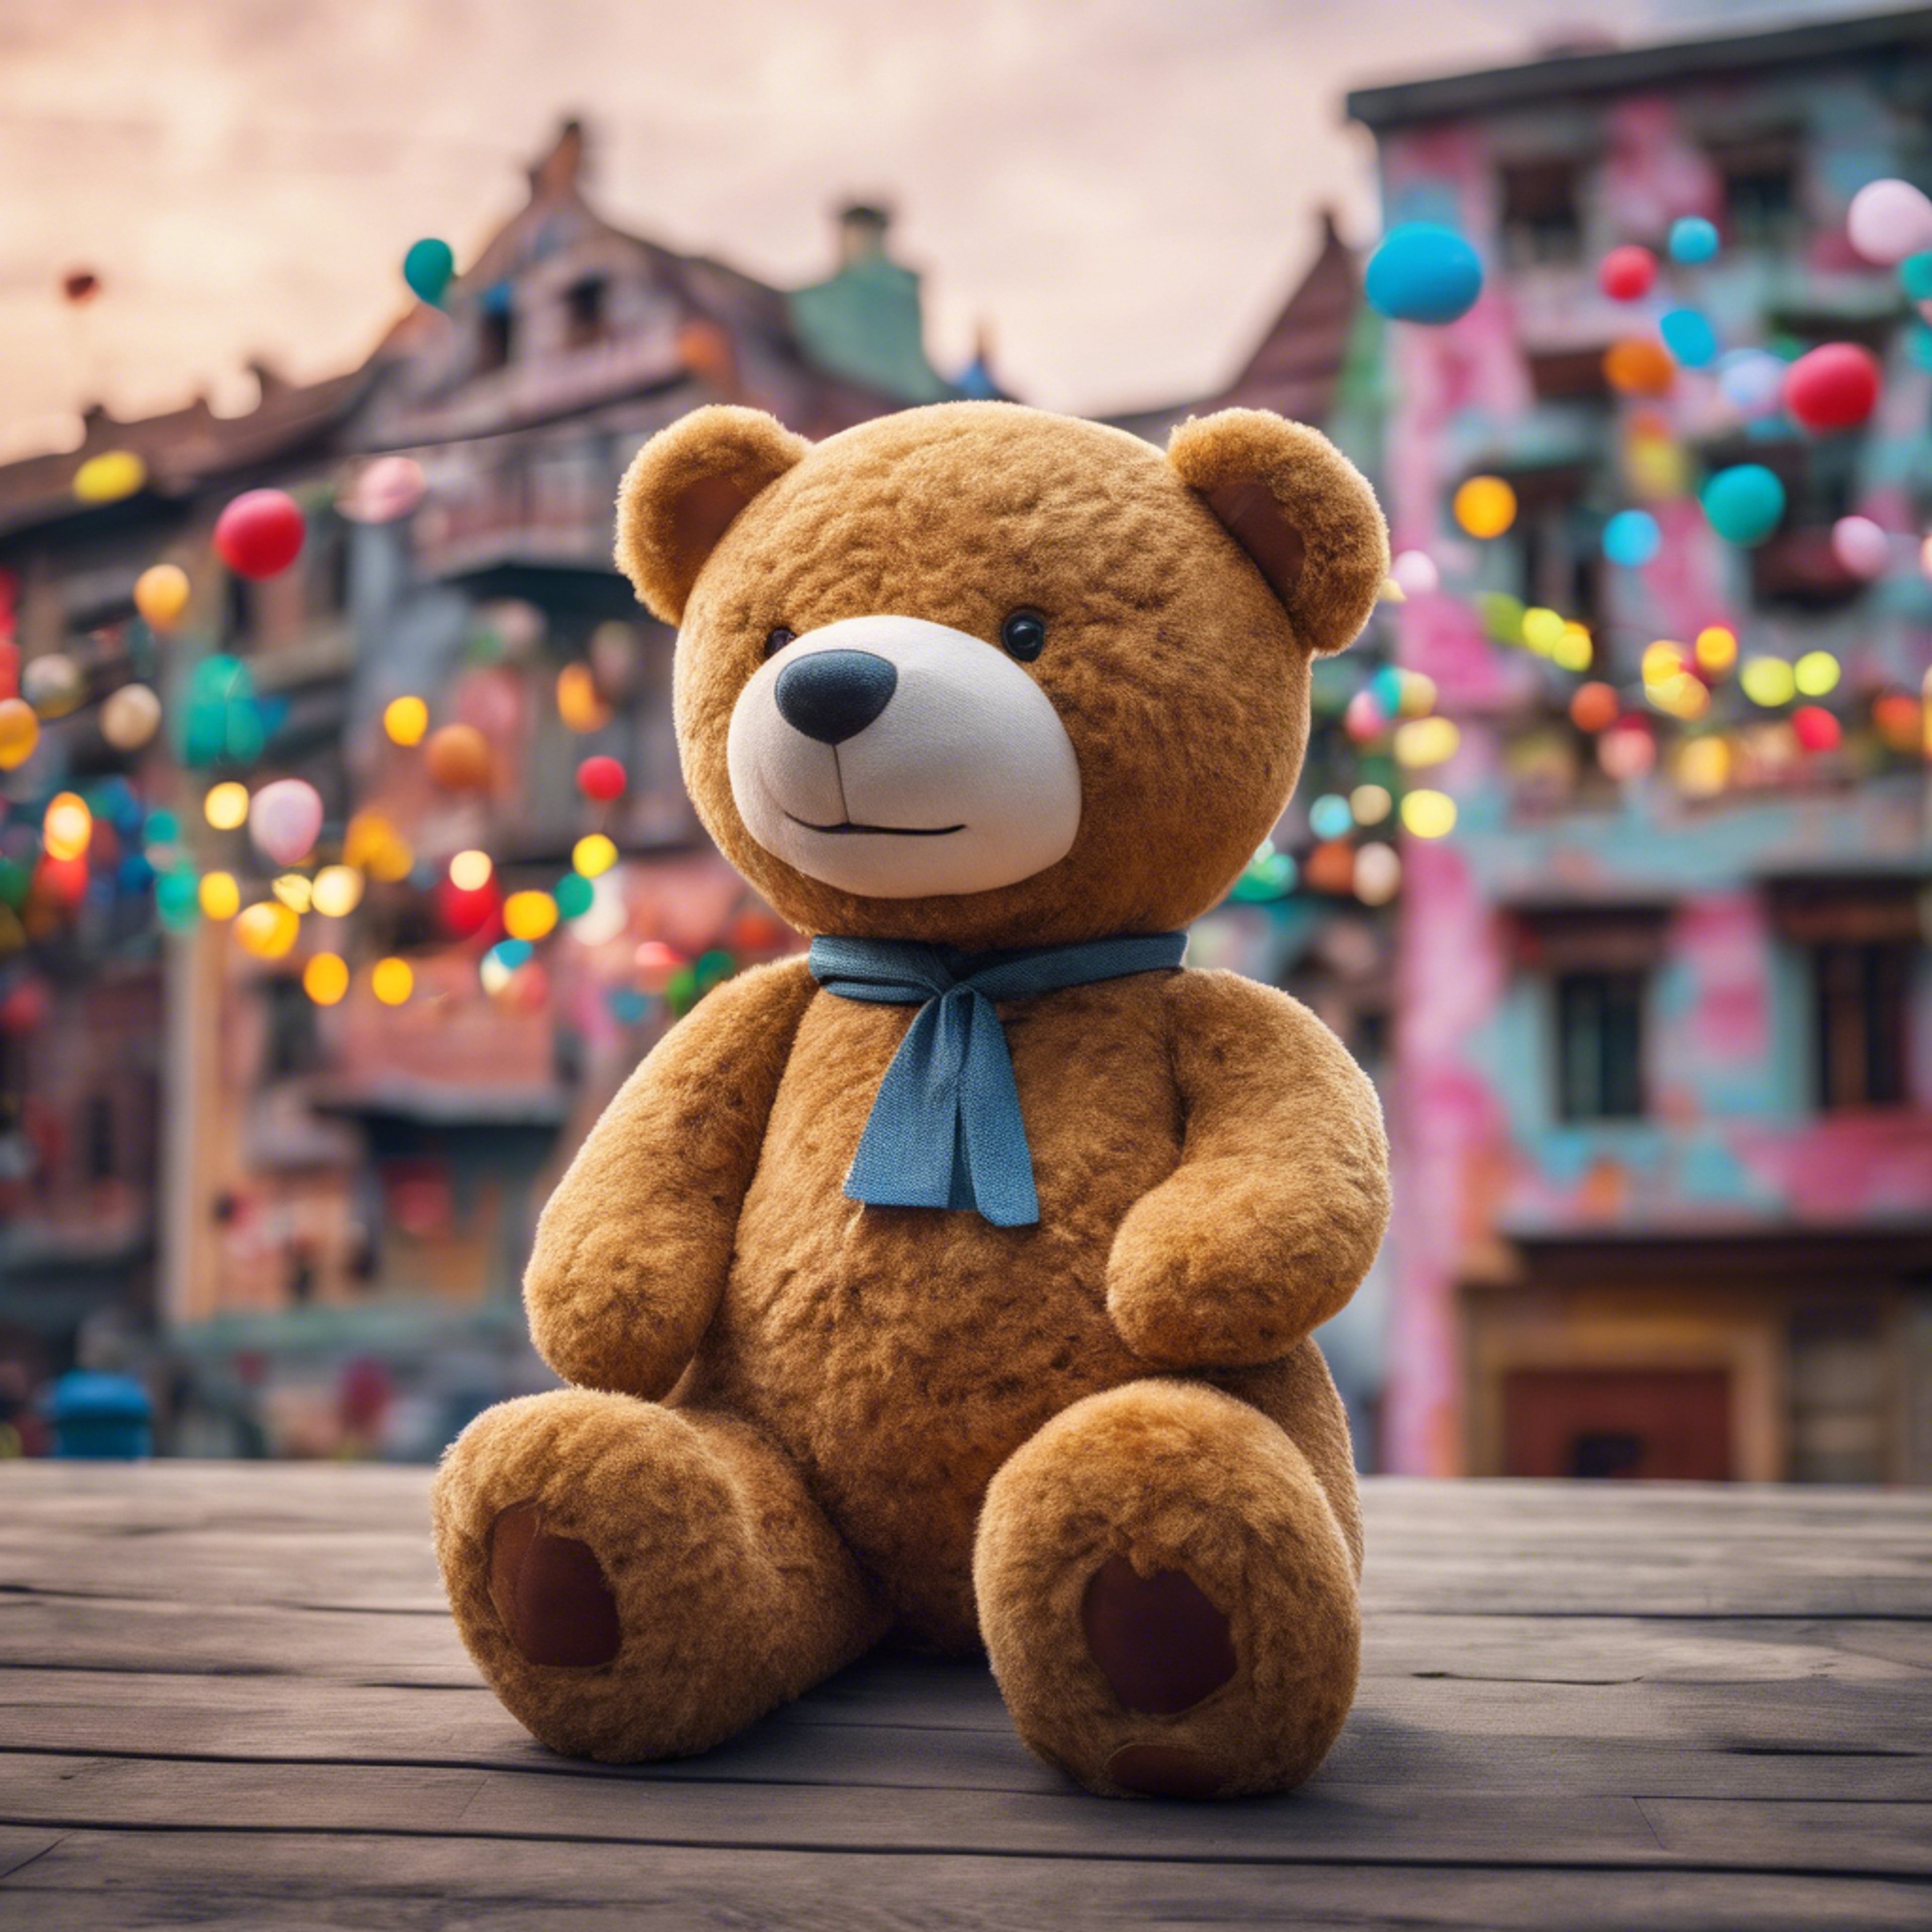 A giant teddy bear watching over a playful and colorful dream town. Валлпапер[2720b550e885450daa82]